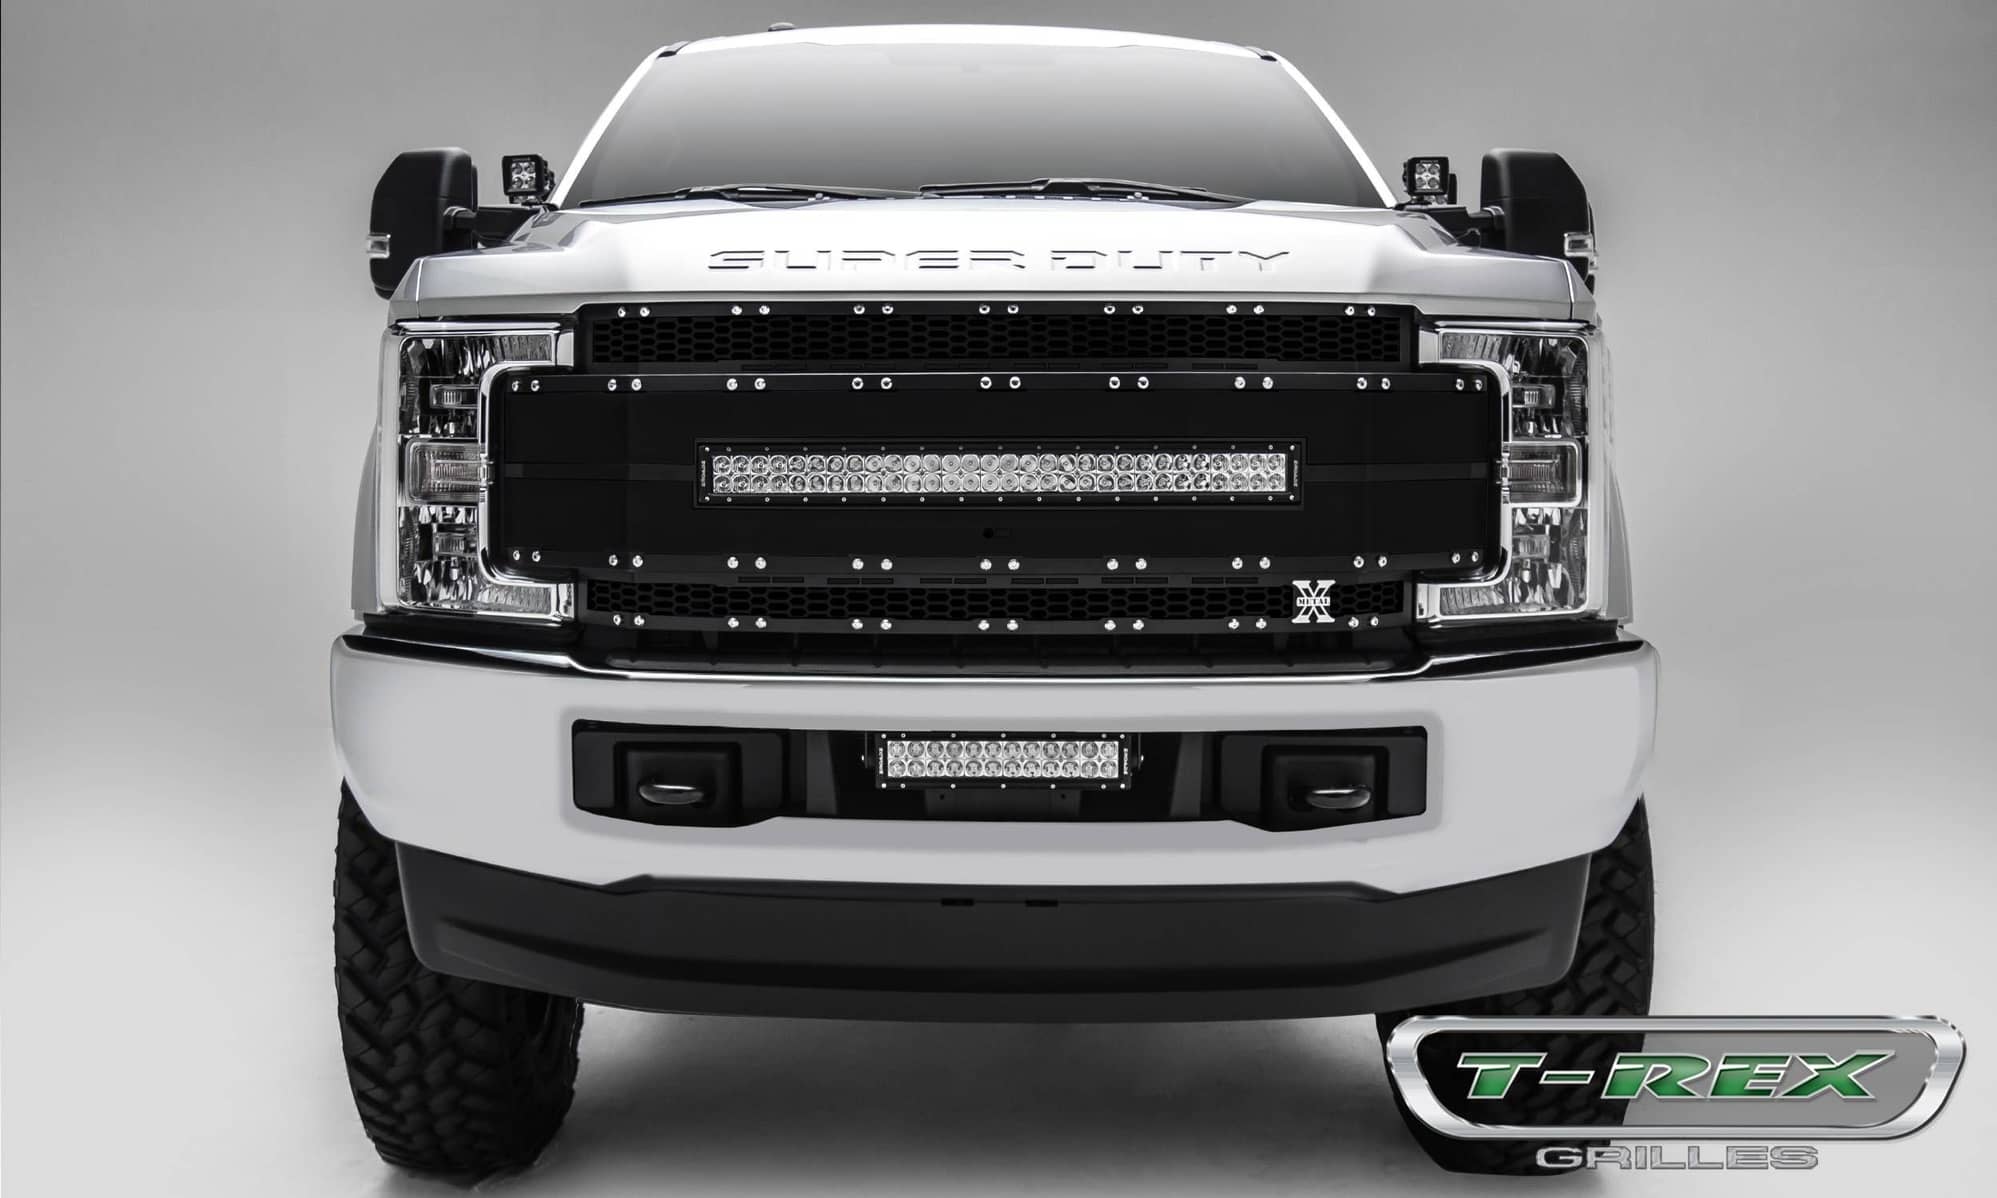 Aftermarket Grill/LED bars - Ford Truck Enthusiasts Forums